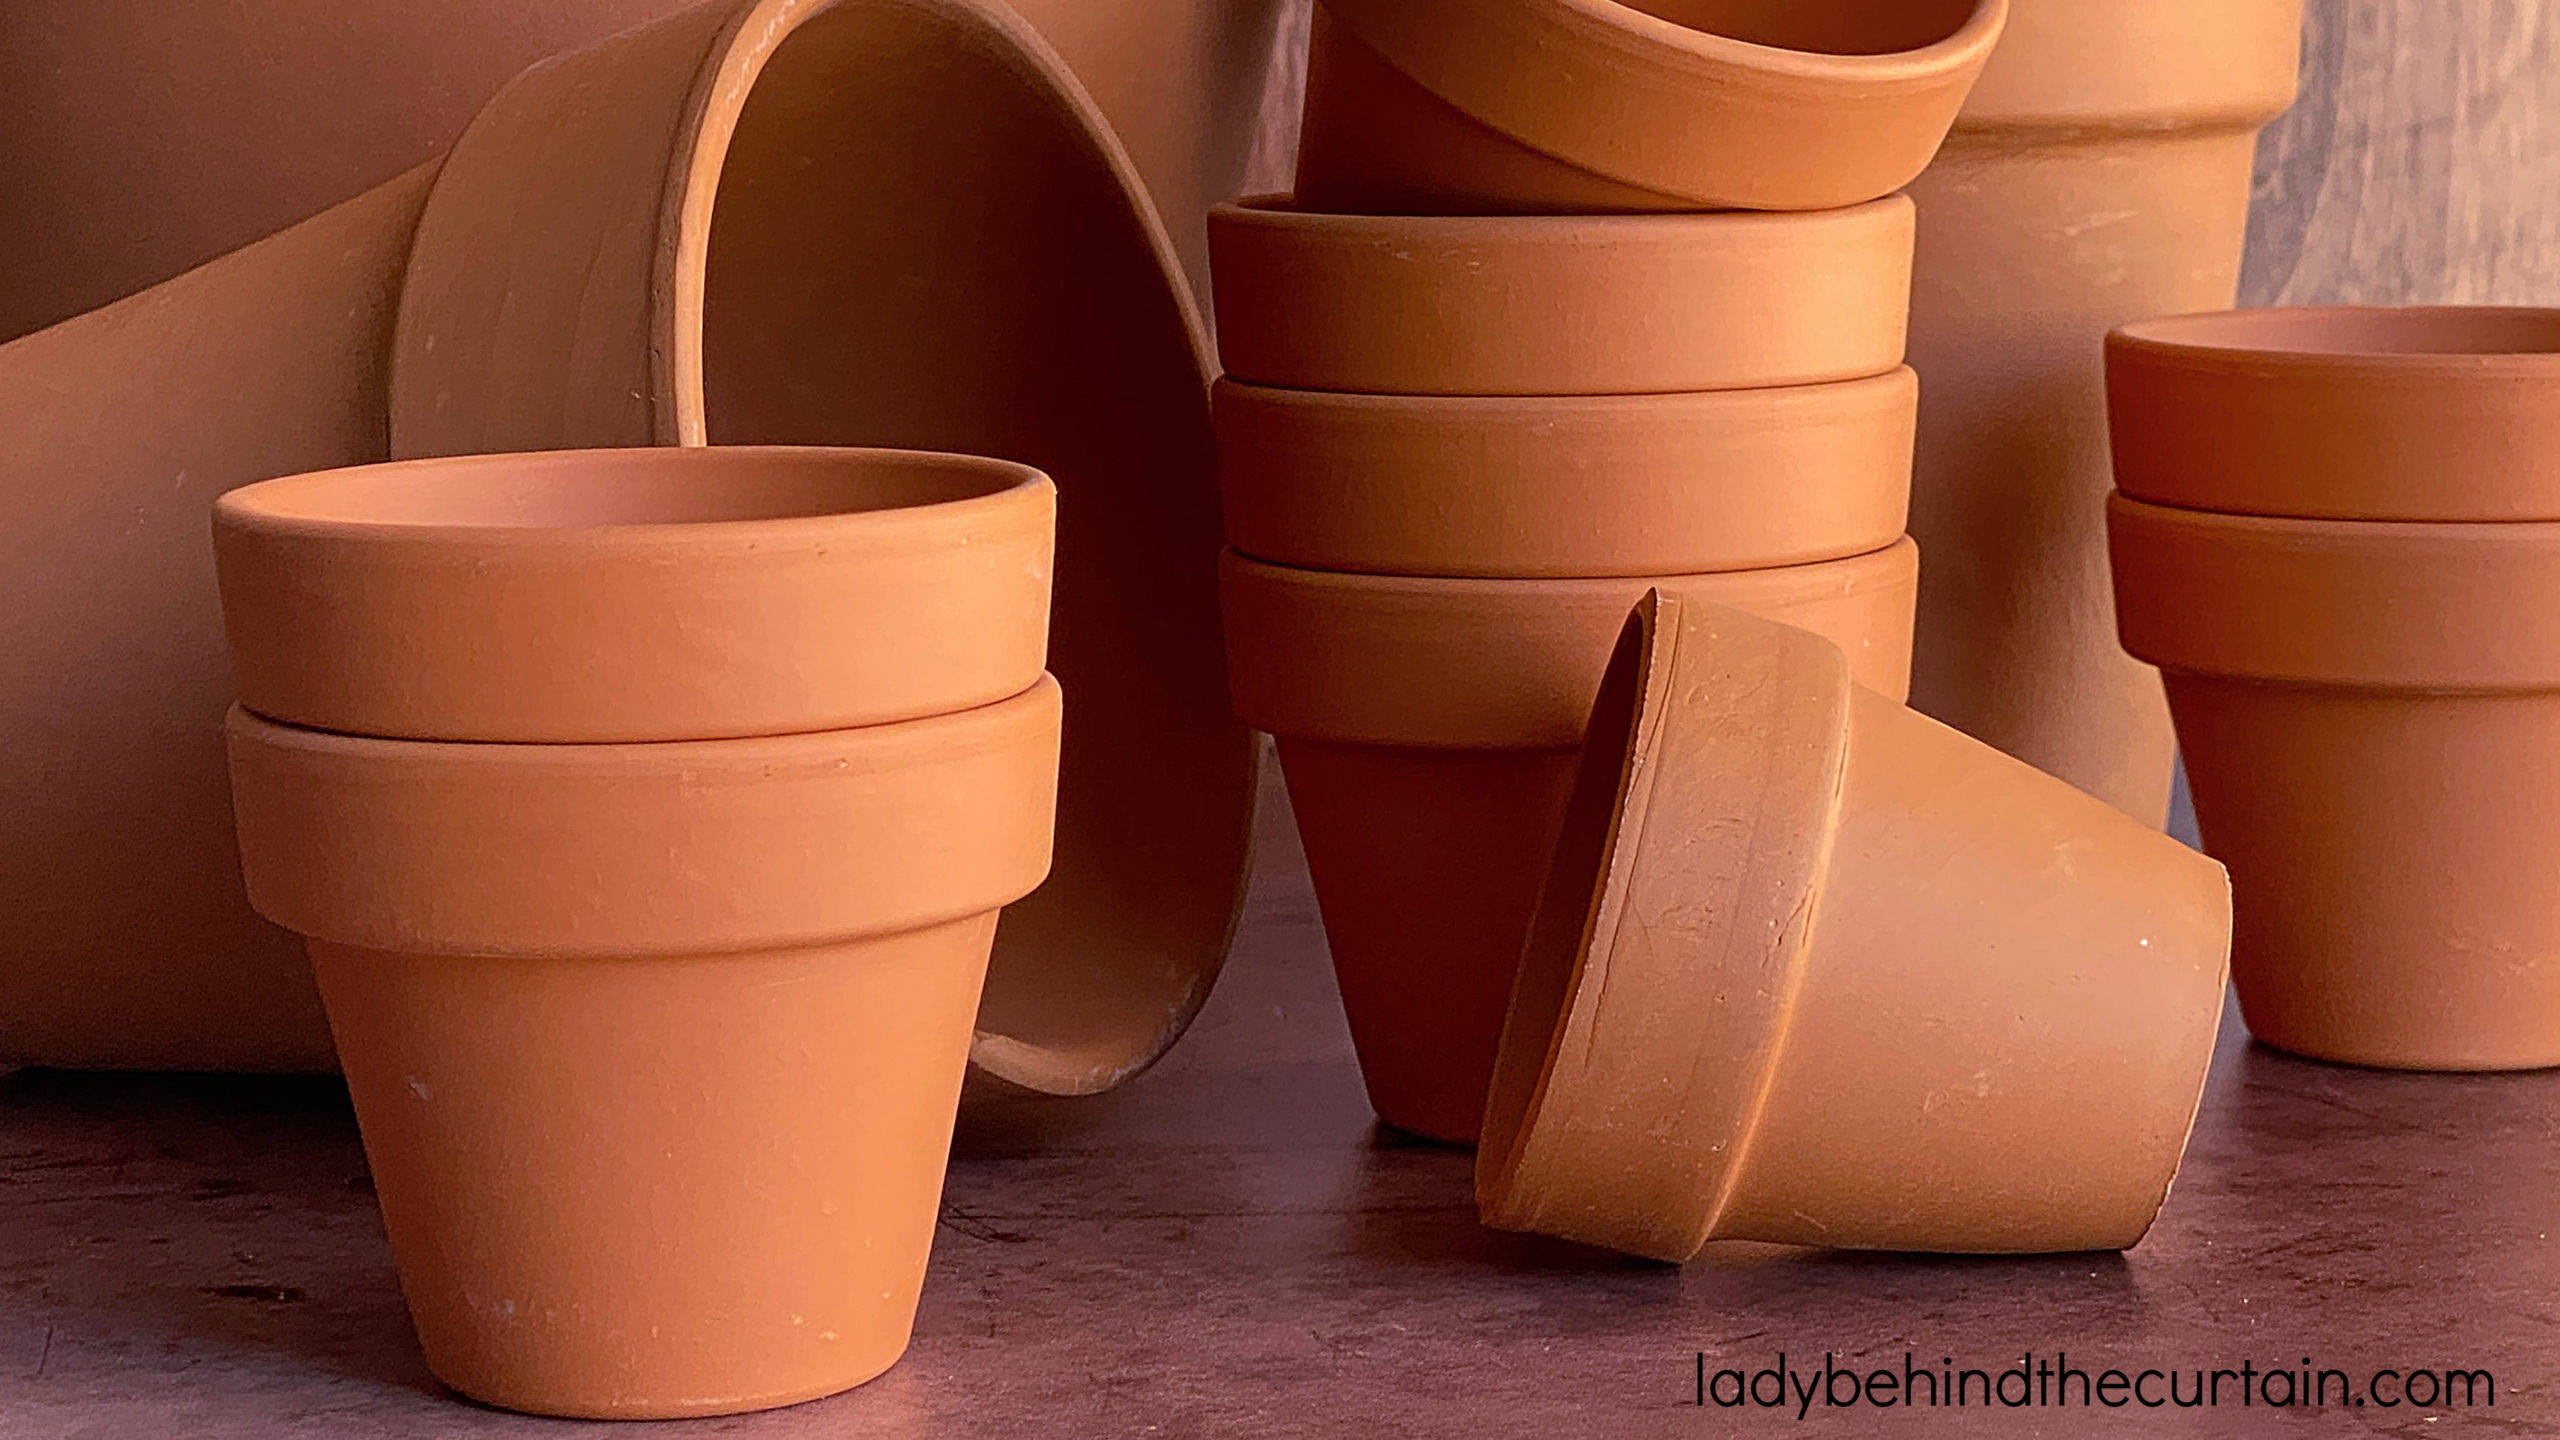 How to Bake in a Clay Flower Pot